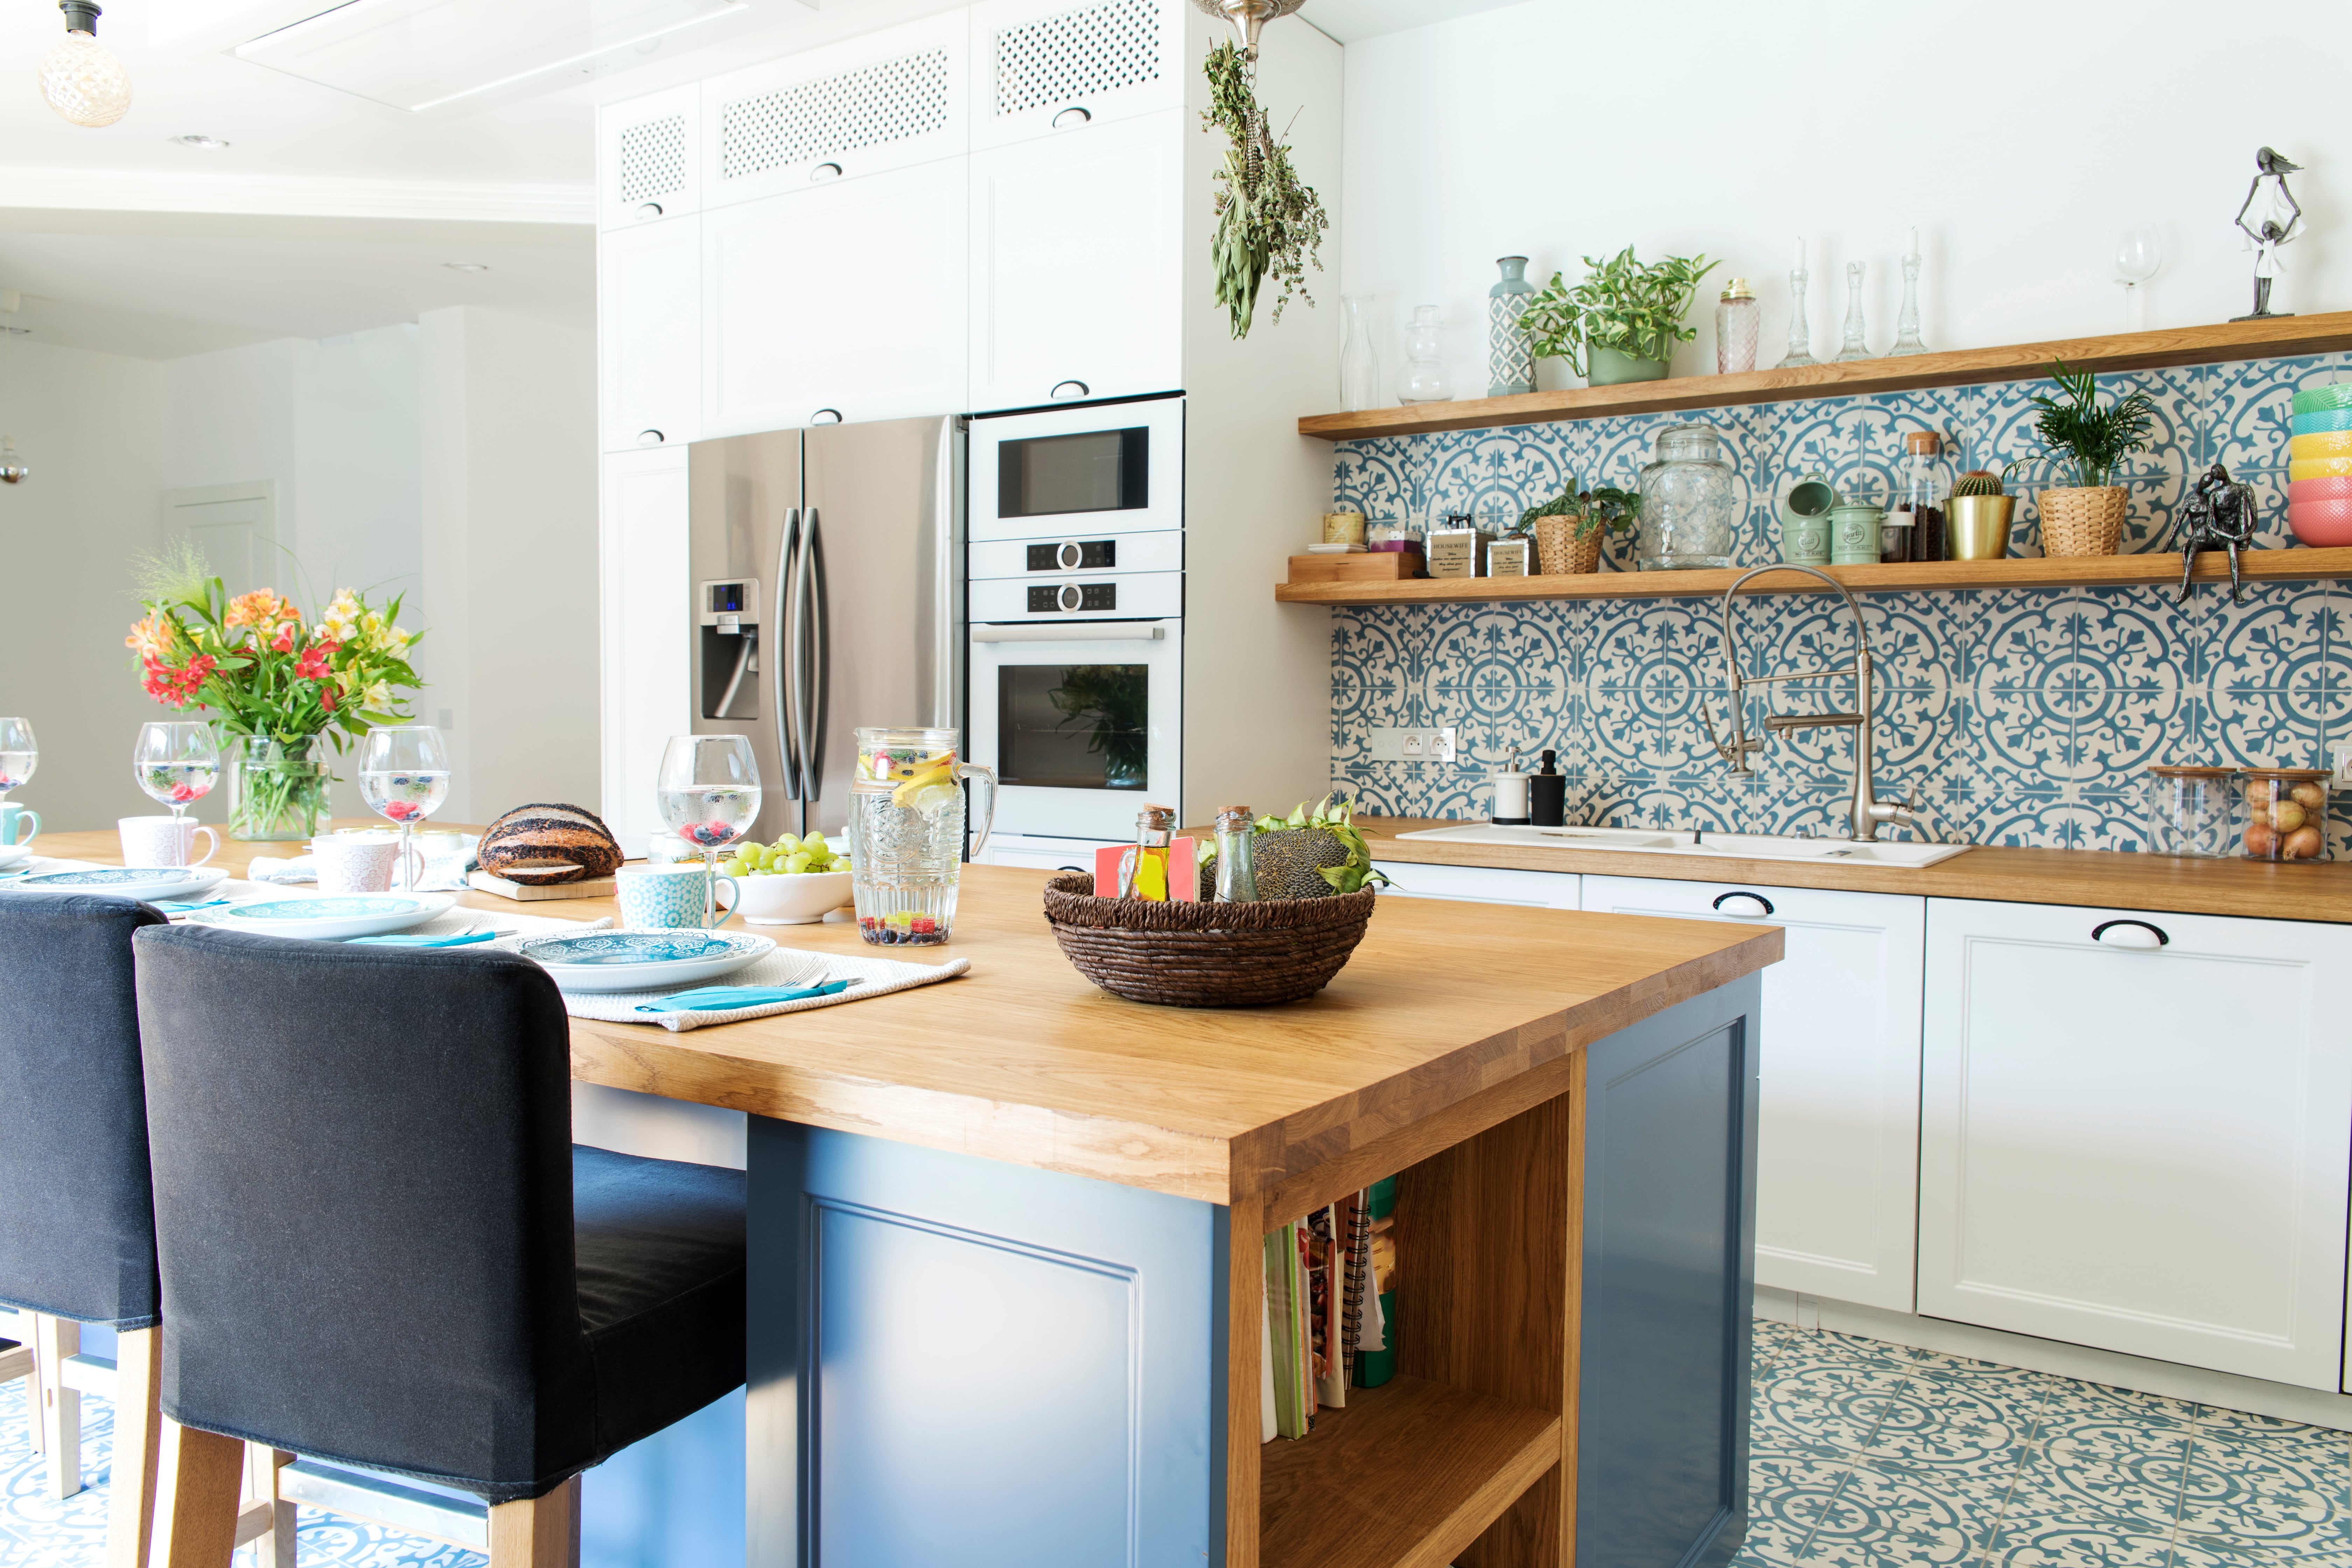 5 Bold Ways to Brighten Your Kitchen With Color